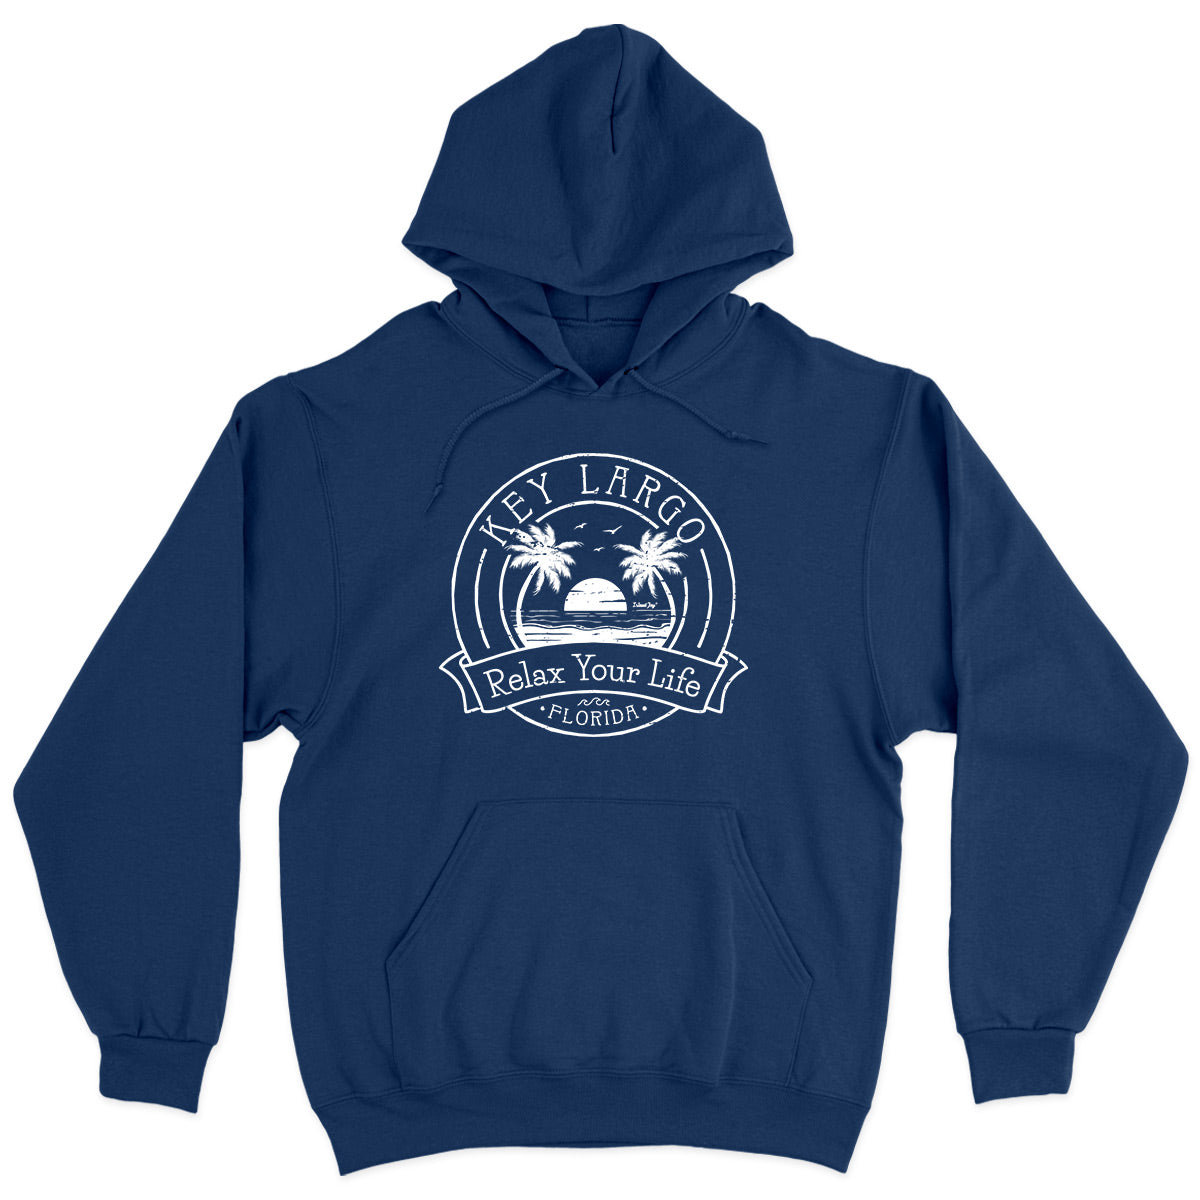 Key Largo Relax Your Life Palm Tree Soft Style Pullover Hoodie